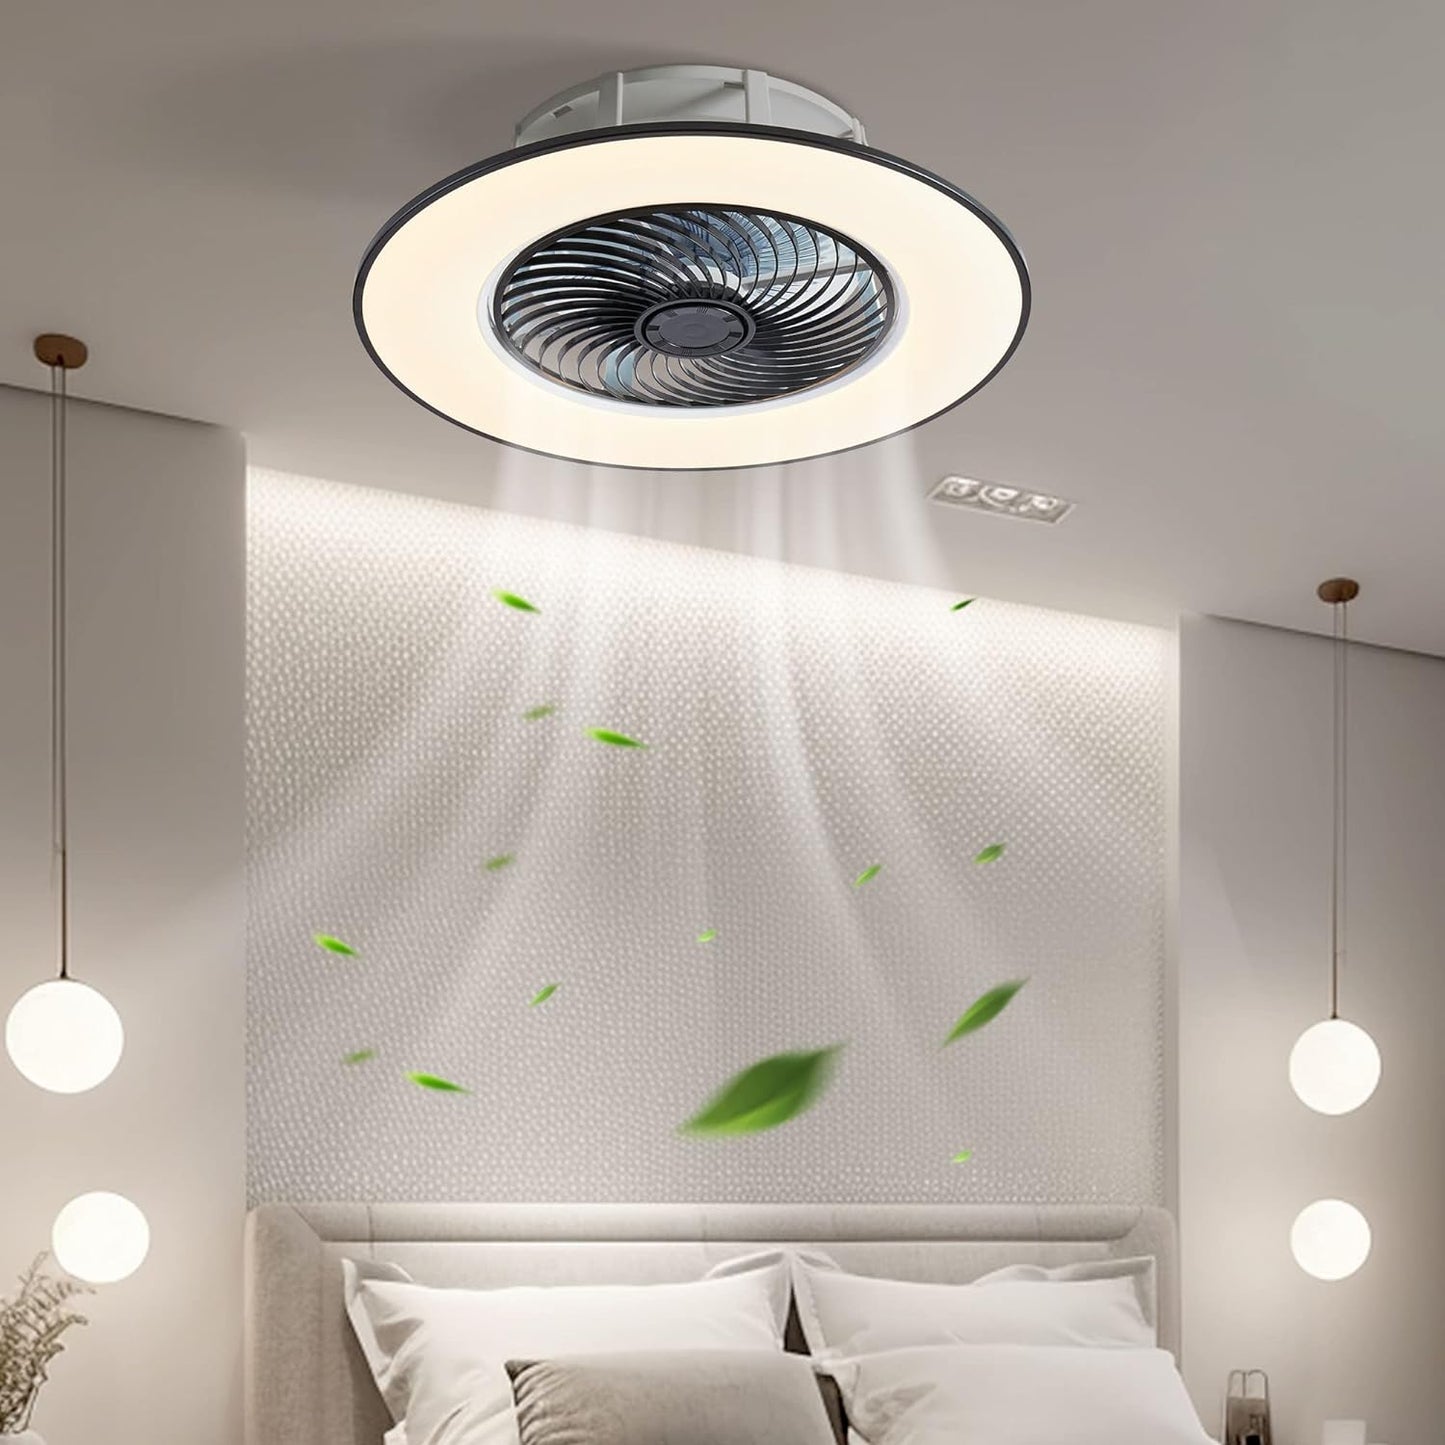 Ceiling lamp RGB with fan - including remote control &amp; App